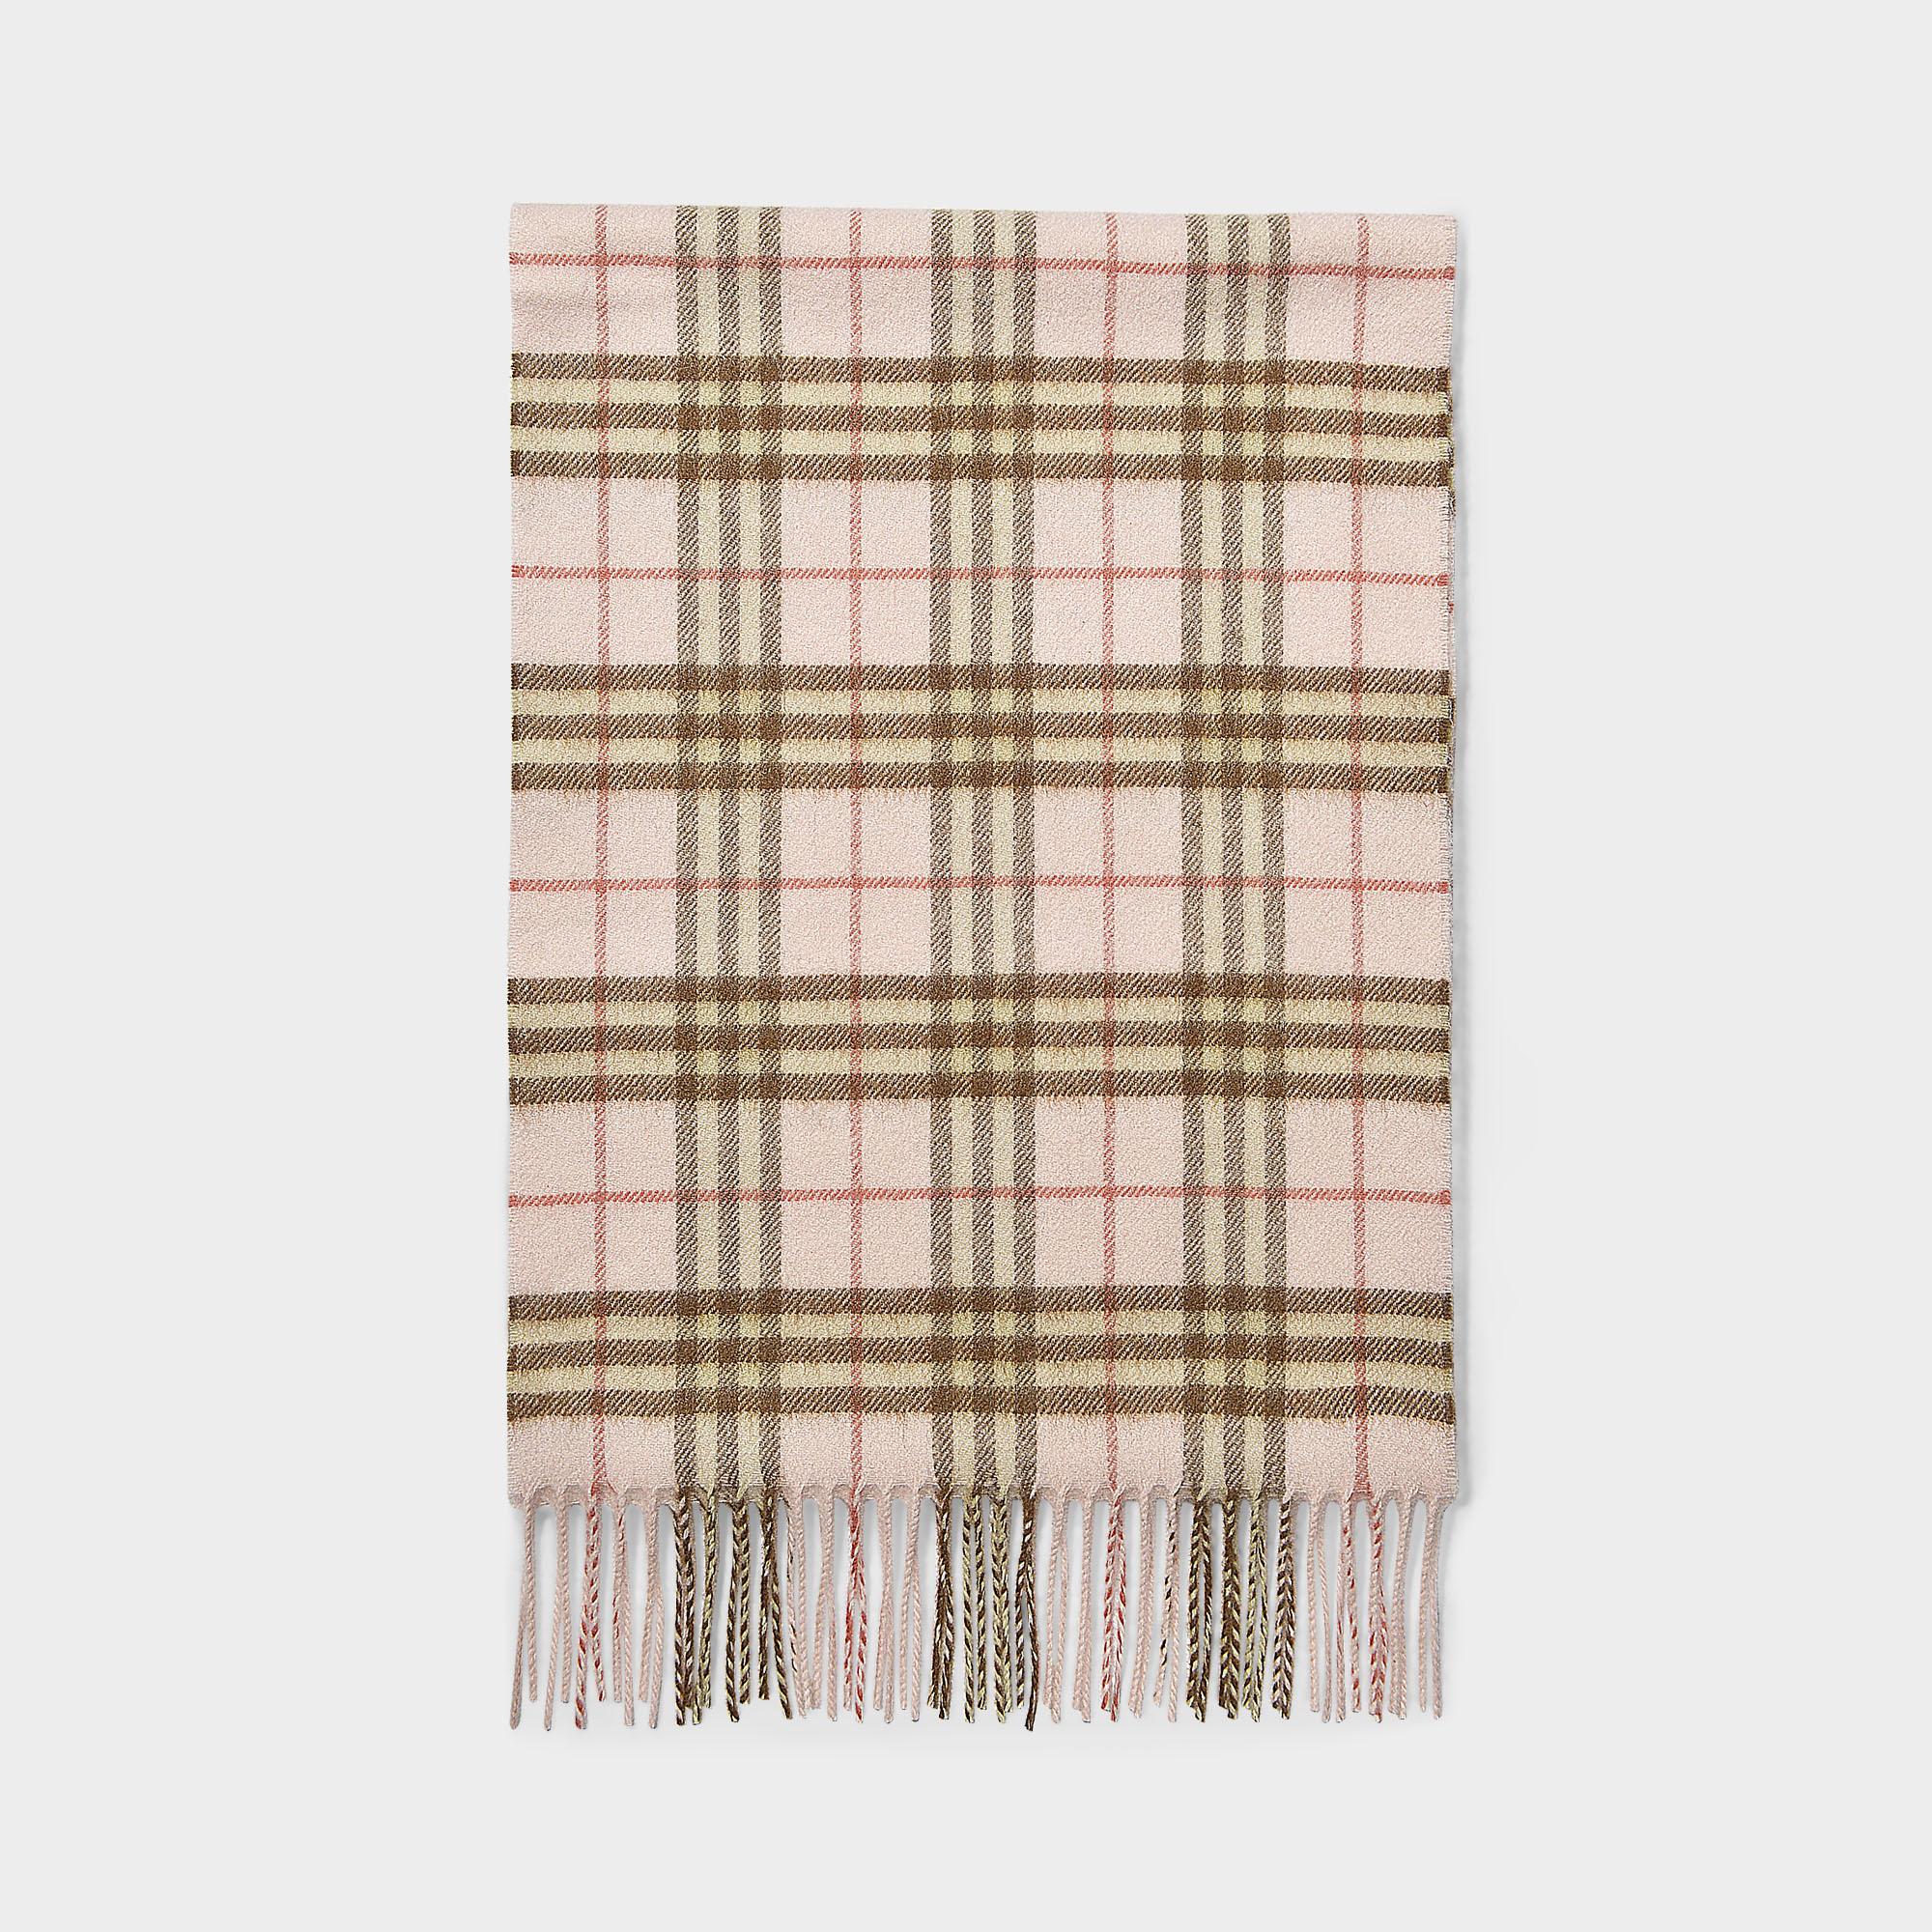 burberry pink cashmere scarf